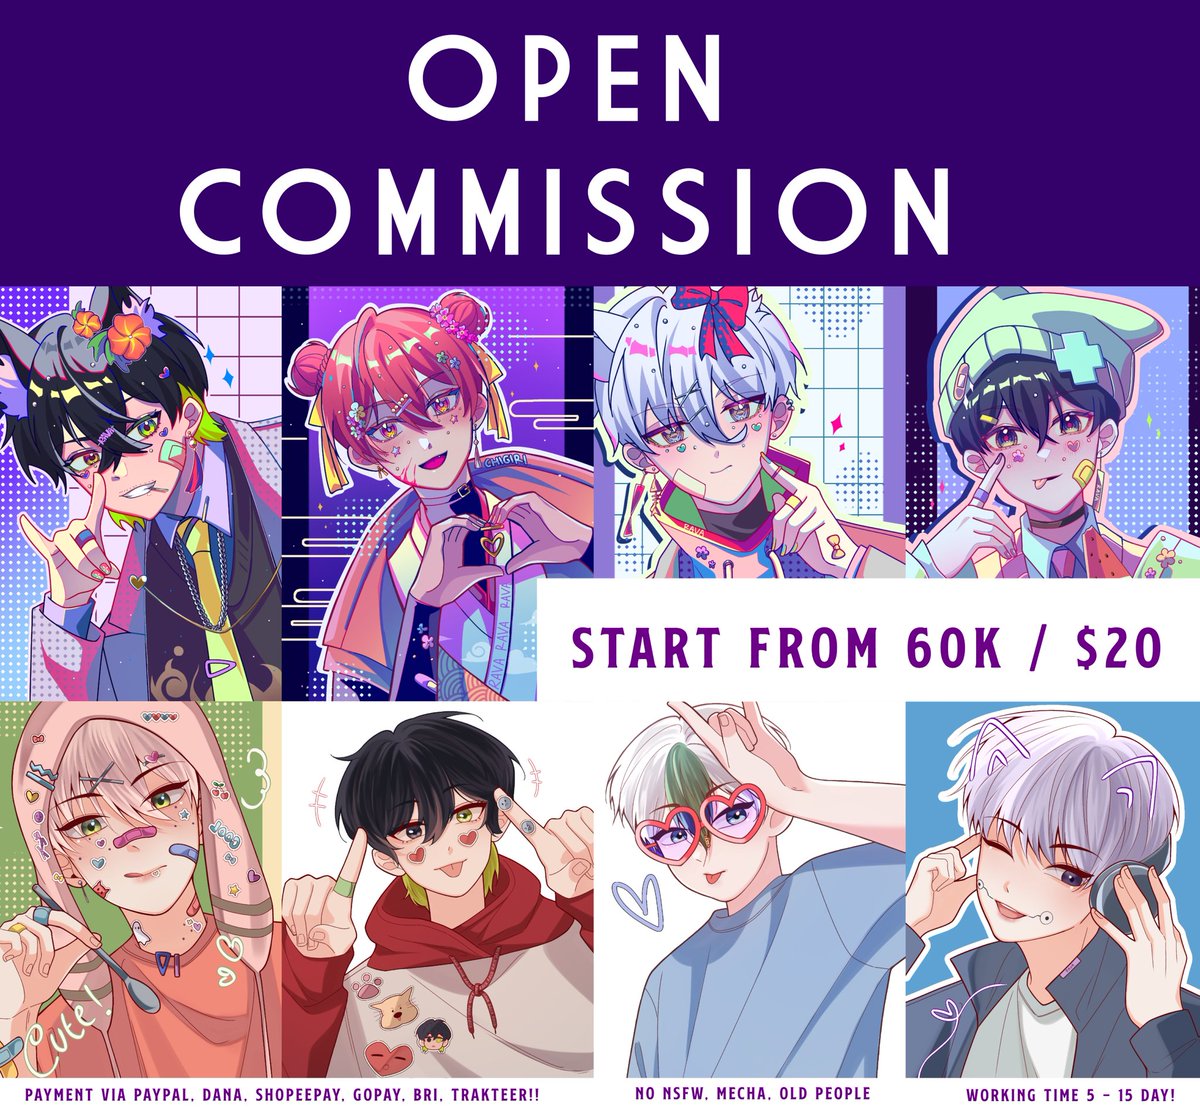 [Rts & like are appreciated!!]

Hello!! I'm opening commission for local & international. Please check my carrd for more sample
> ravalio.carrd.co
> #ravocs

Please dm me if you interested🩷
#commissionopen #ArtistOfindonesia #artidn #commission #wts